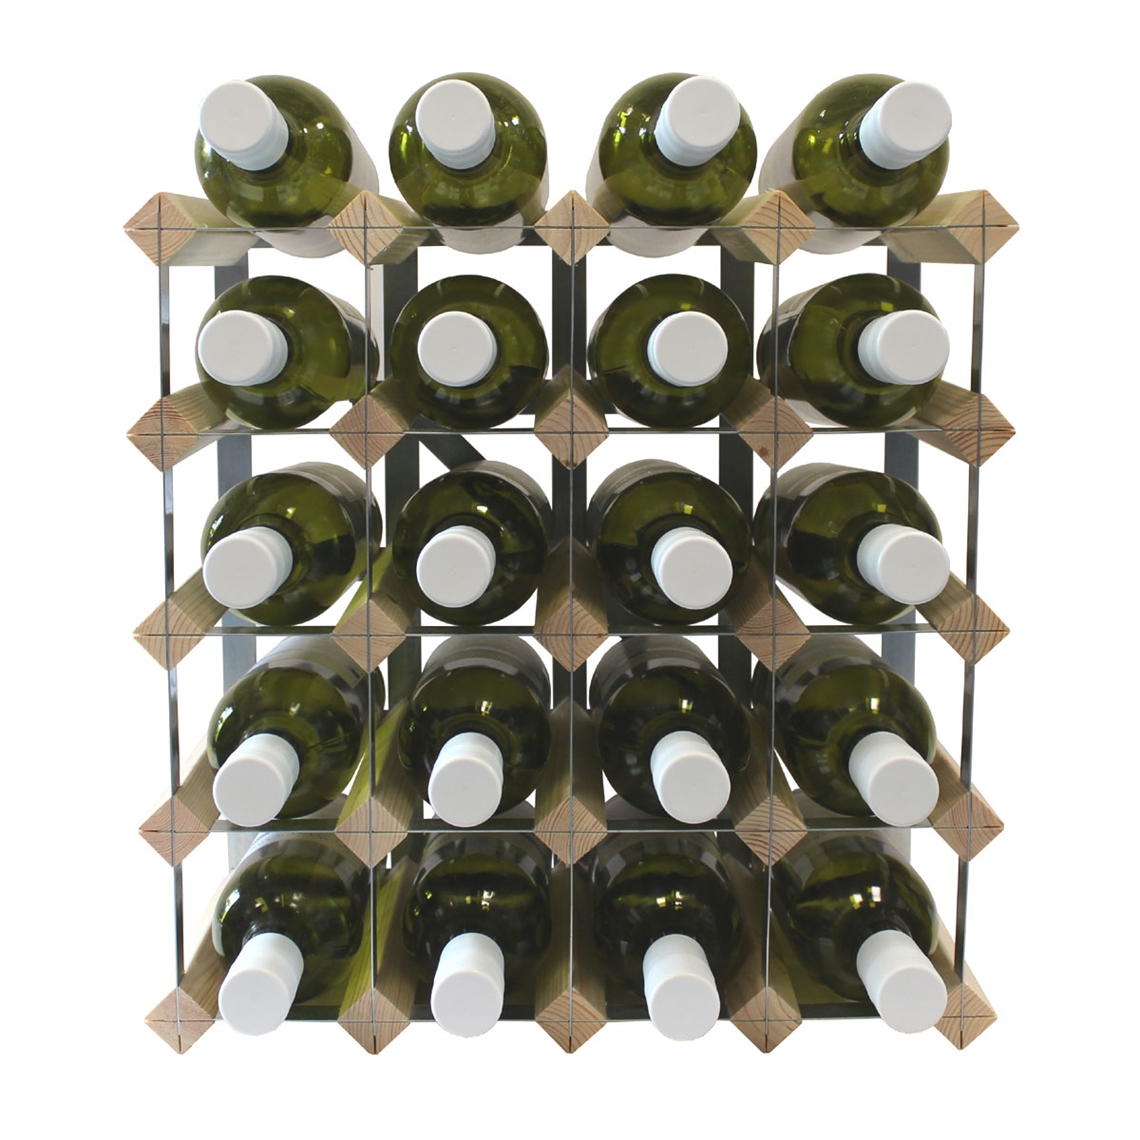 View more wine racks from our Assembled Wine Racks range